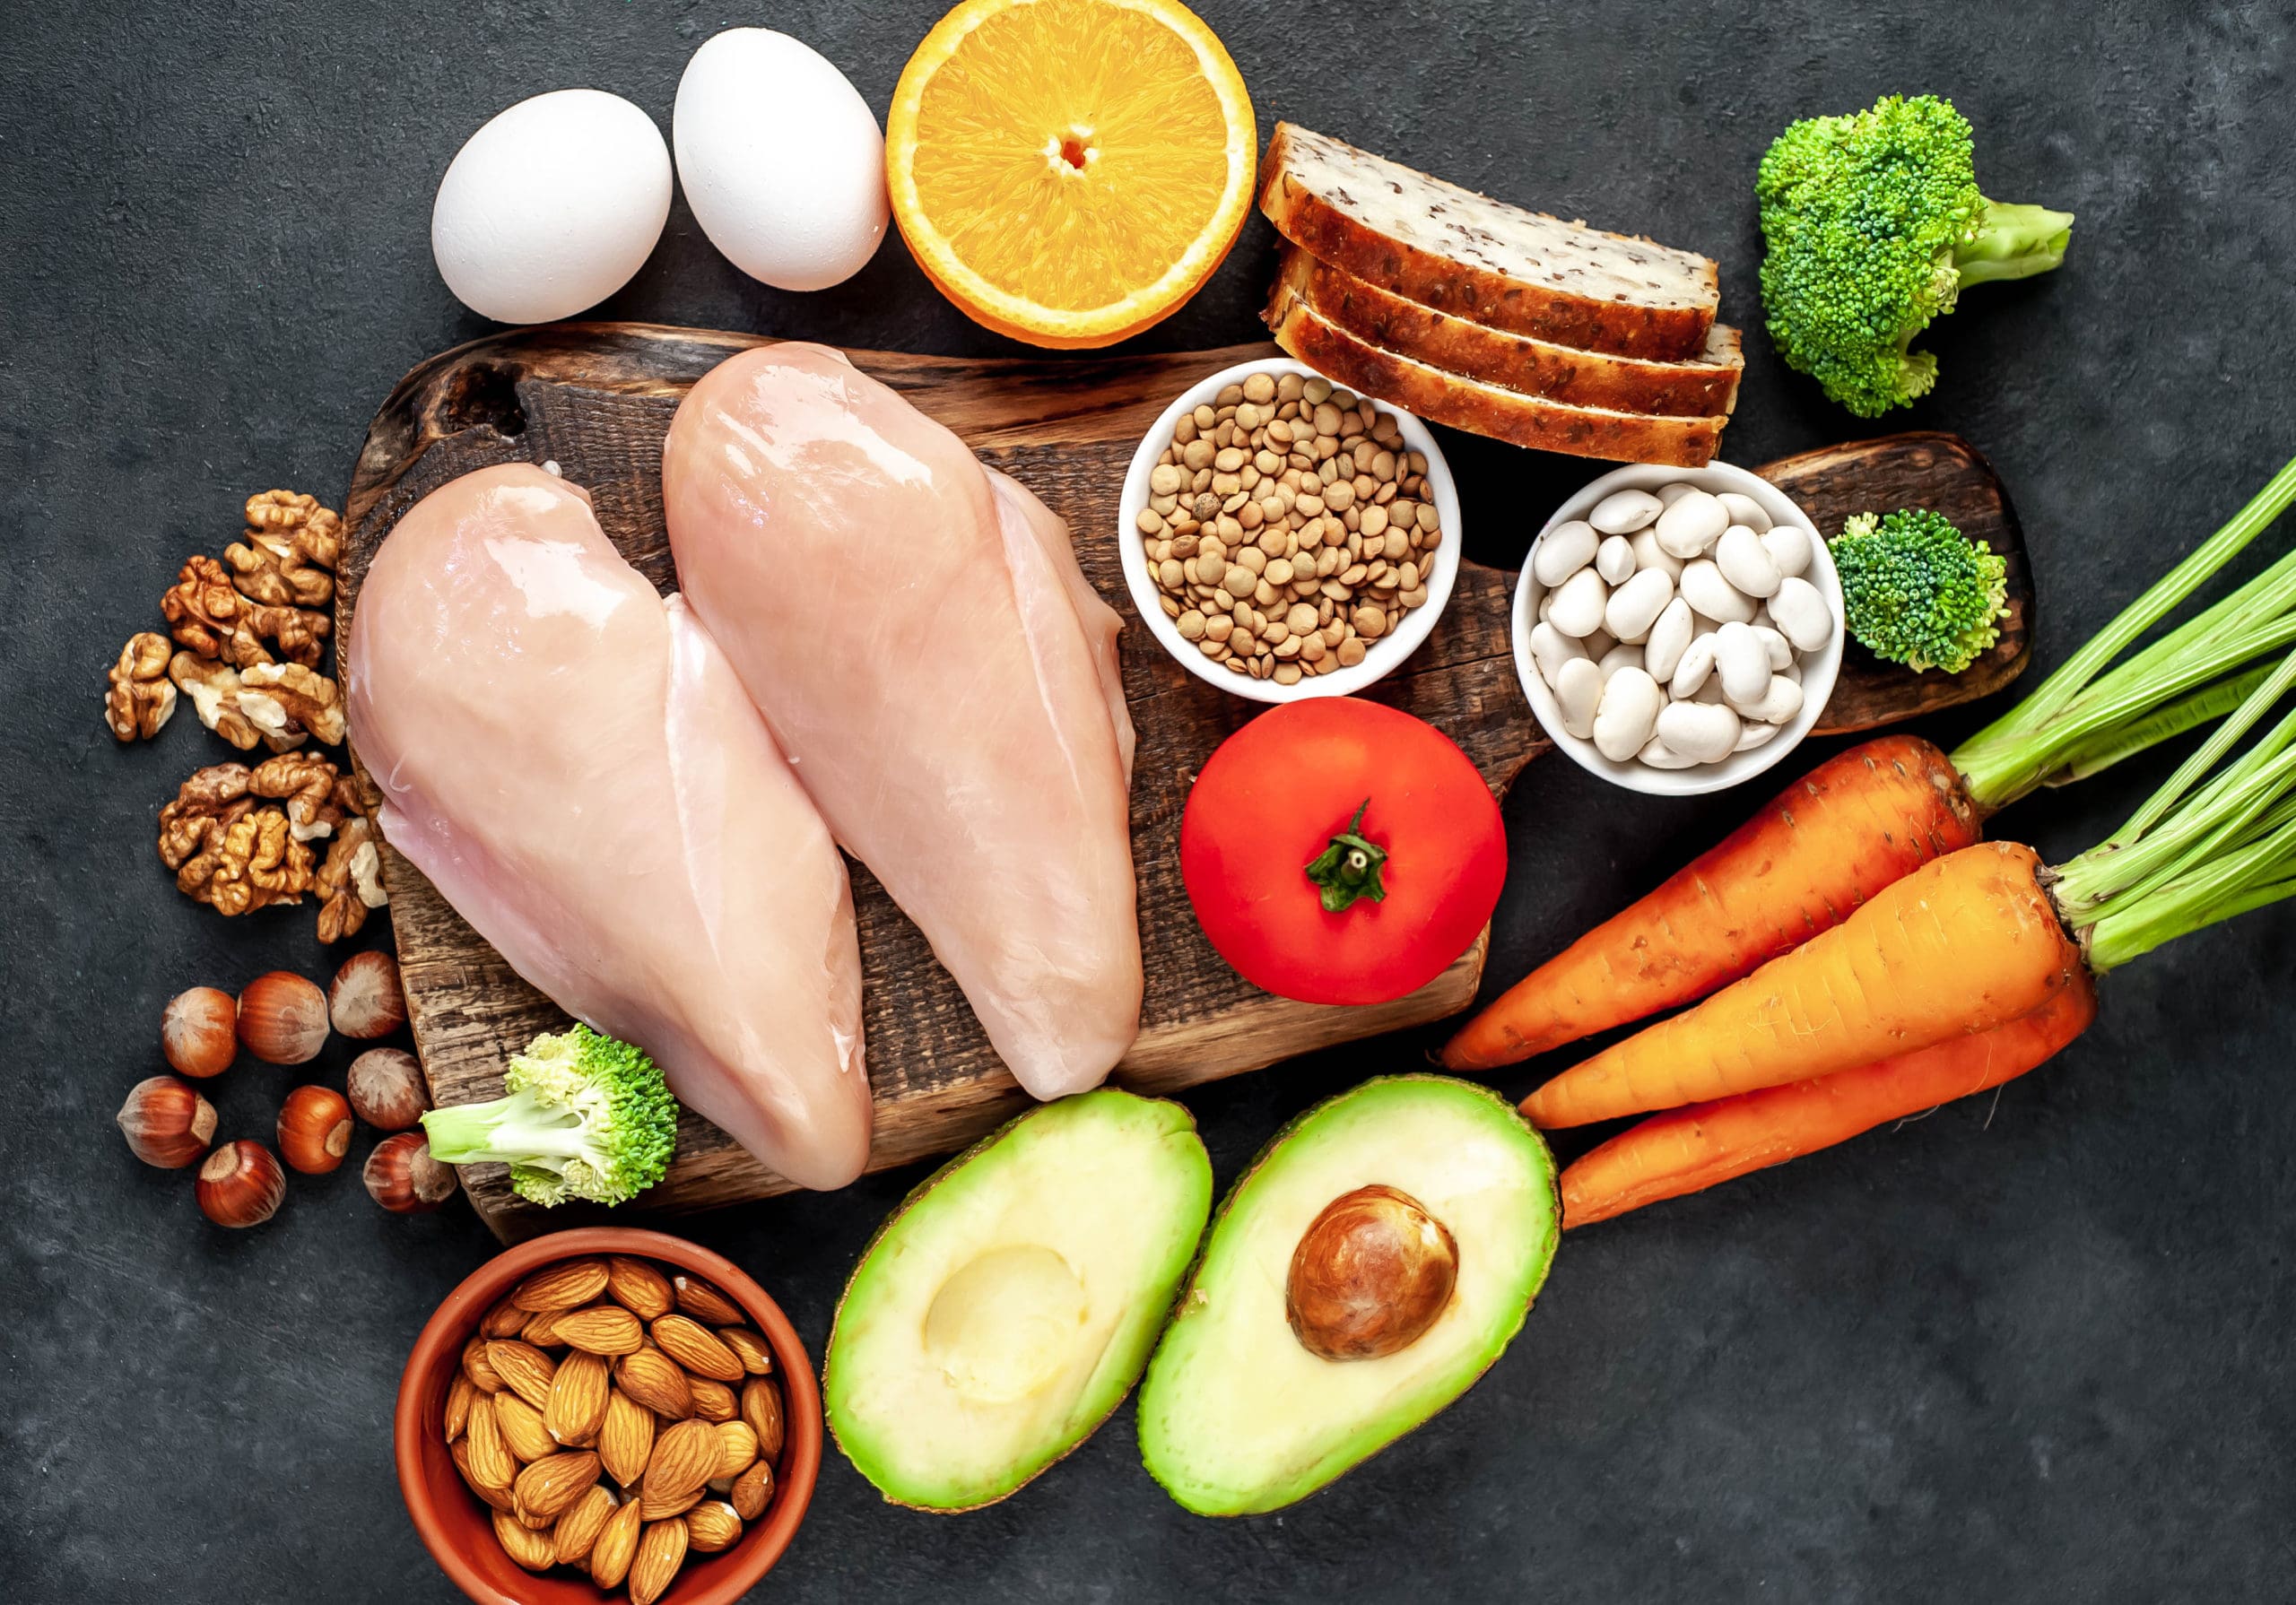 Variety of healthy foods including raw chicken breast, eggs, orange slice, bread, lentils, white beans, tomato, carrots, broccoli, avocado, almonds, walnuts, and hazelnuts on a dark surface.